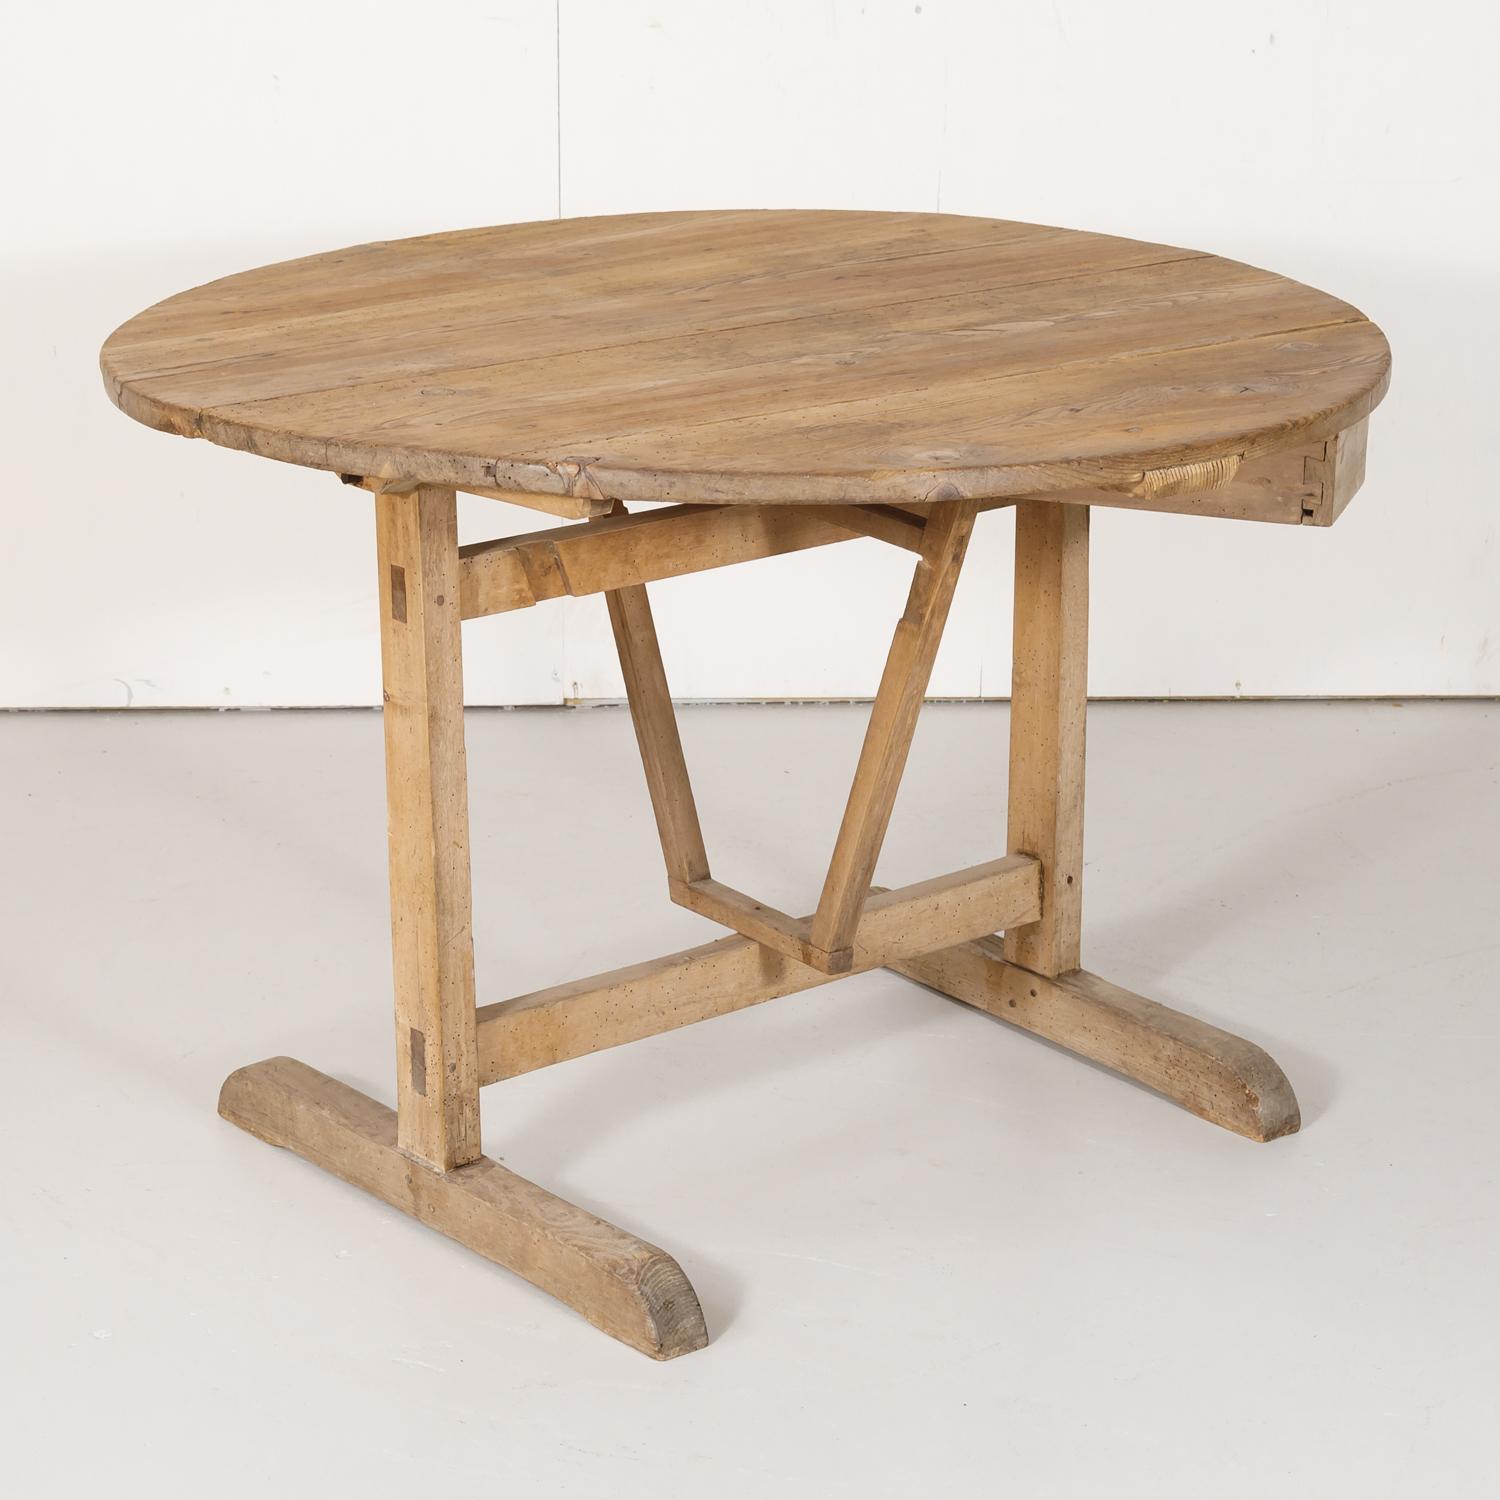 Late 19th Century 19th Century Rustic Bleached Pine French Vendange or Wine Tasting Tilt-Top Table